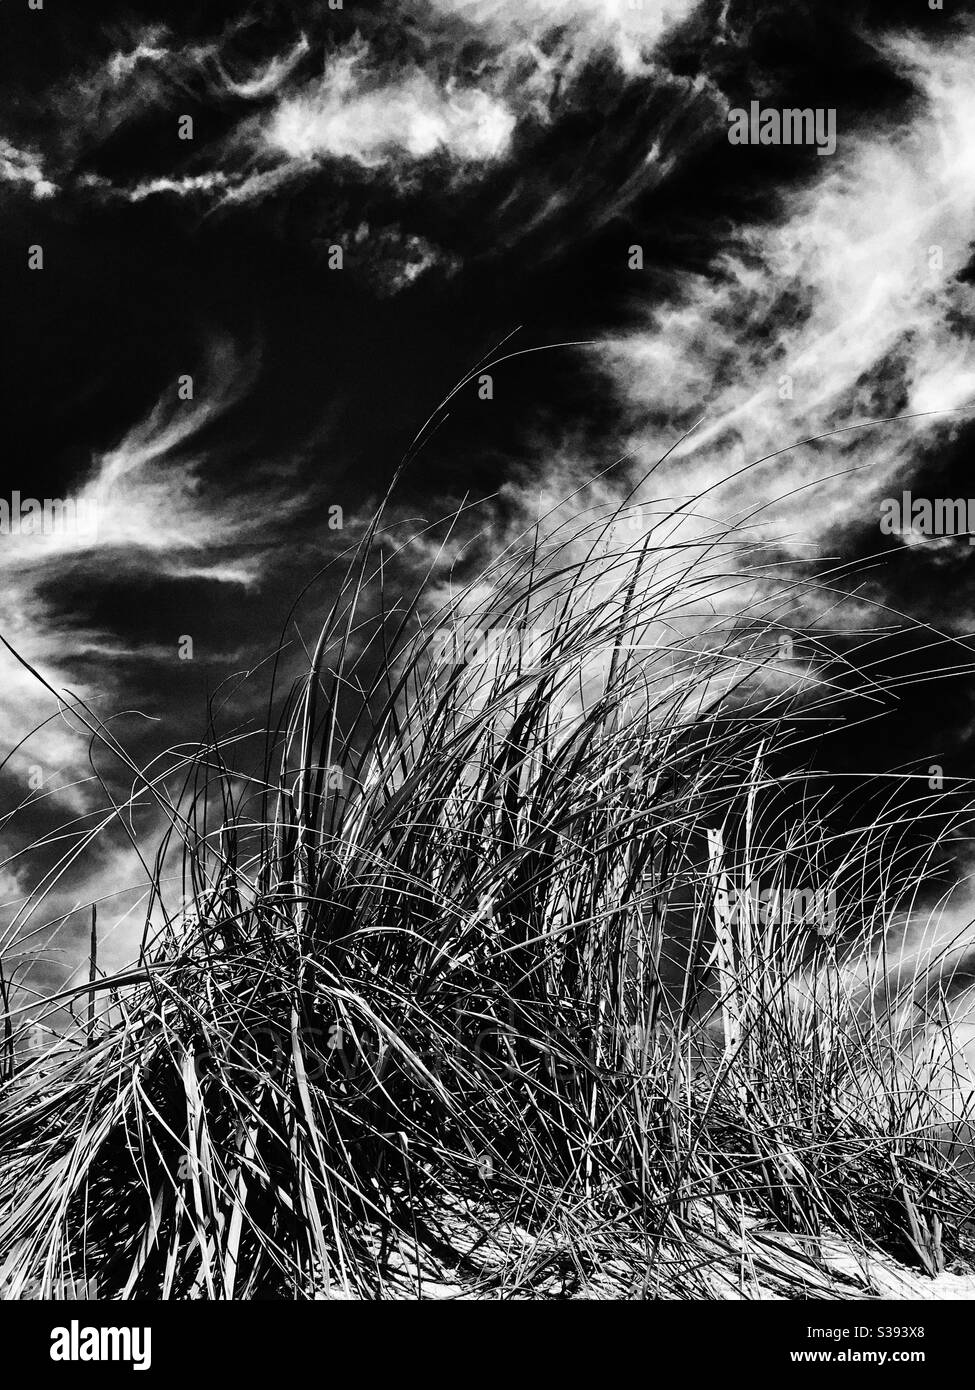 Grass in the sand. Clouds in the sky. Black-and-White photography. Stock Photo